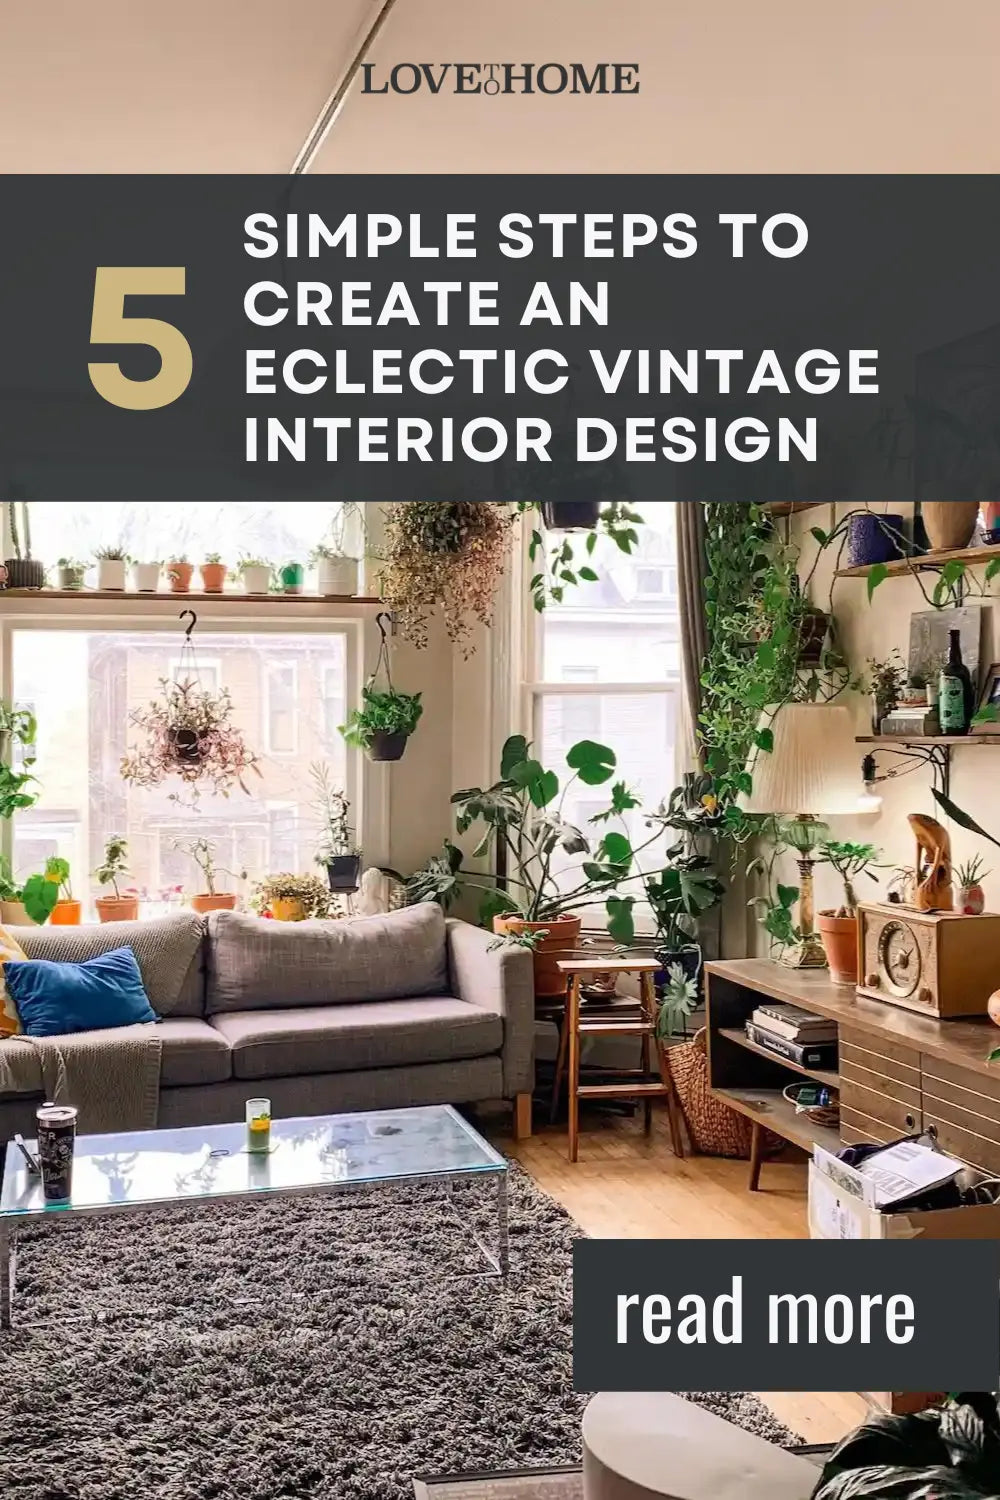 5 Simple Steps to Create an Eclectic Vintage Interior Design